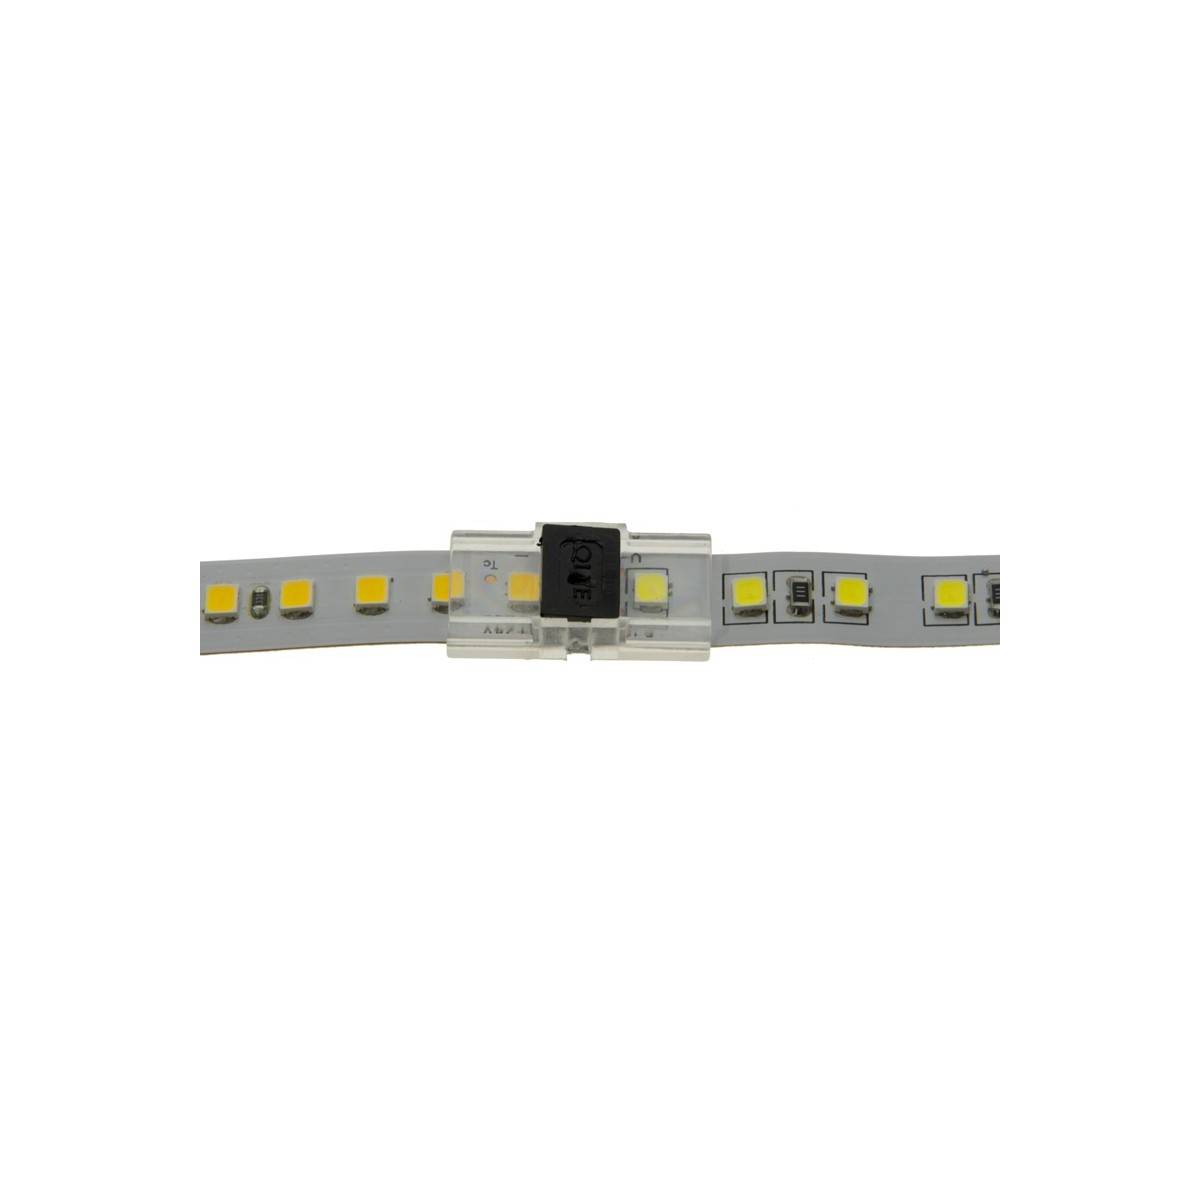 Buy quick connection between LED strips CLIP 2 pin PCB 10mm